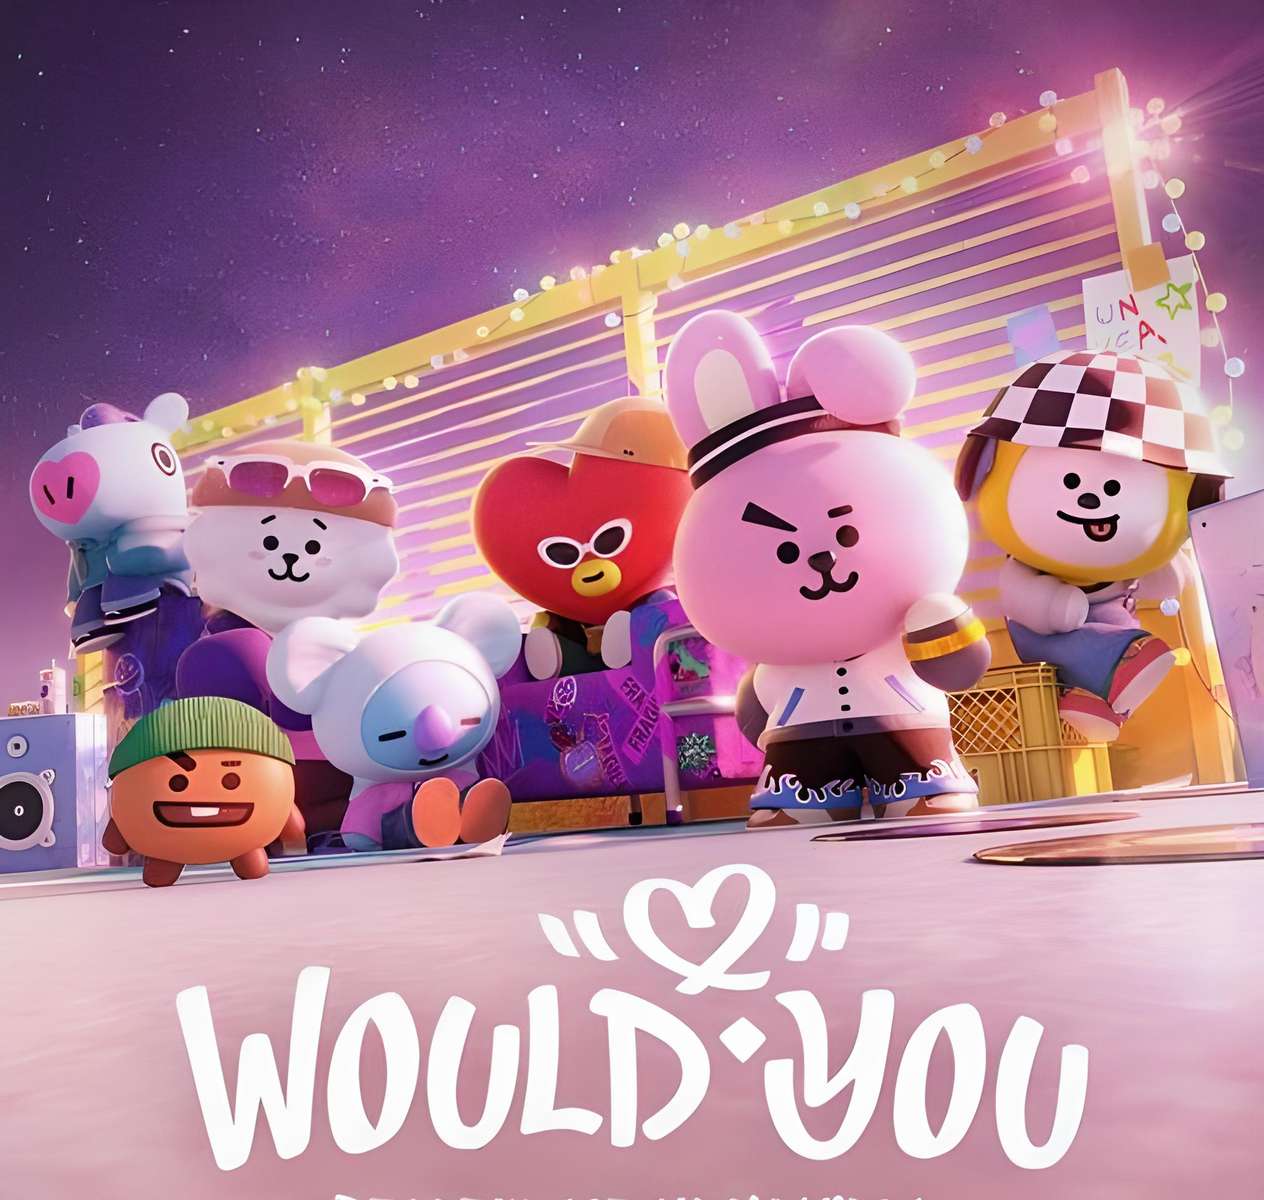 bt21 WOULD YOU - Puzzle Factory